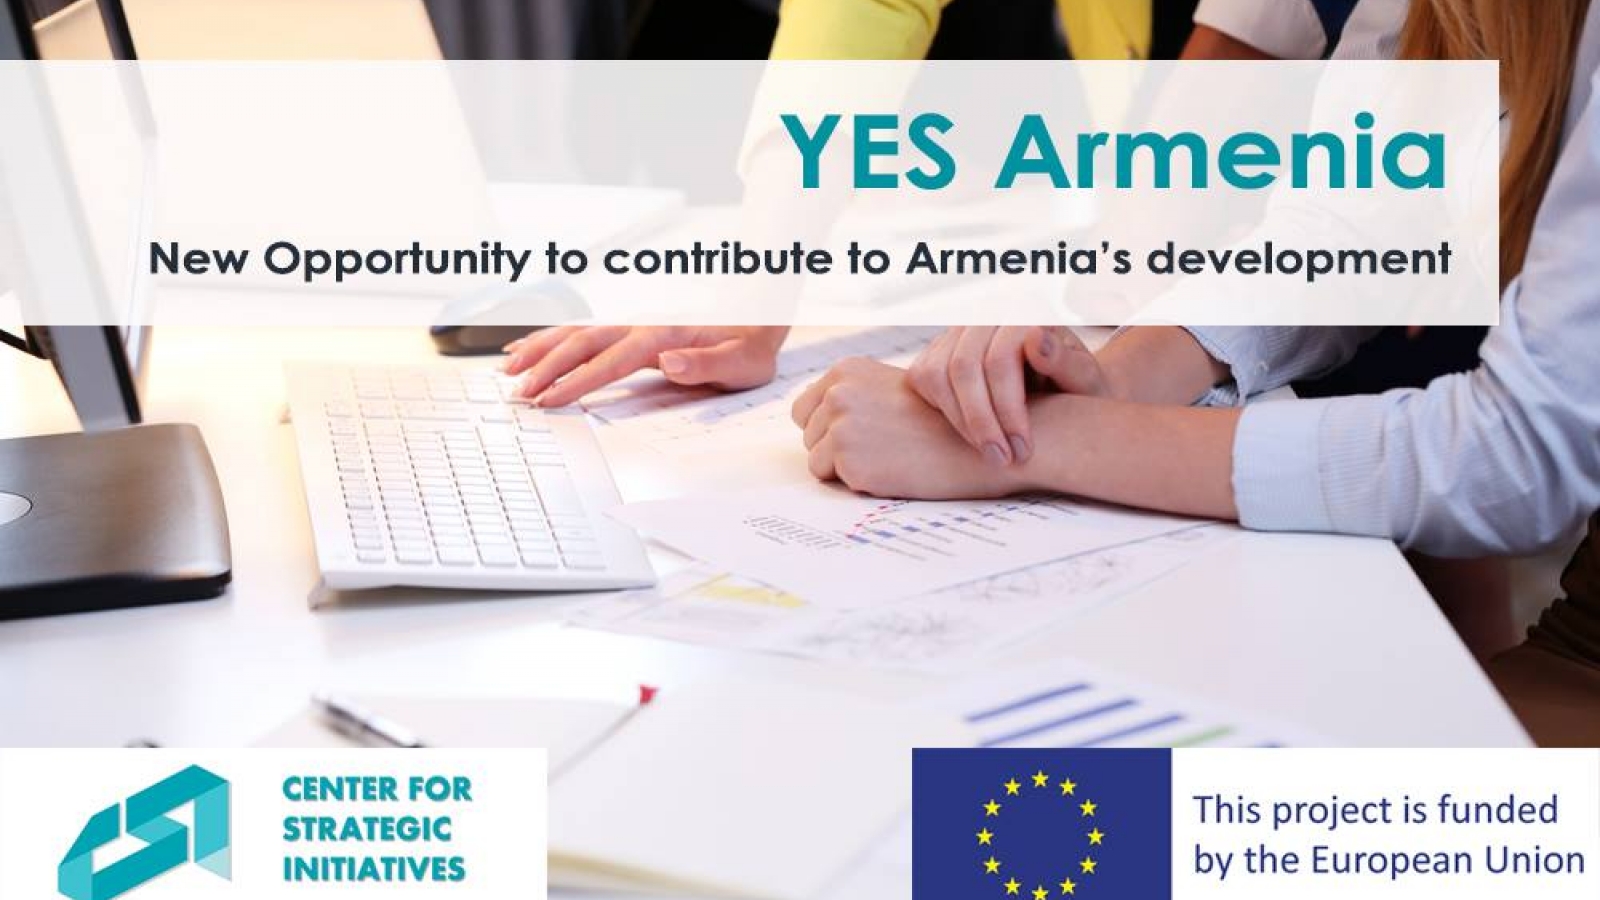 Armenian youth to gain experience in government thanks to EU programme